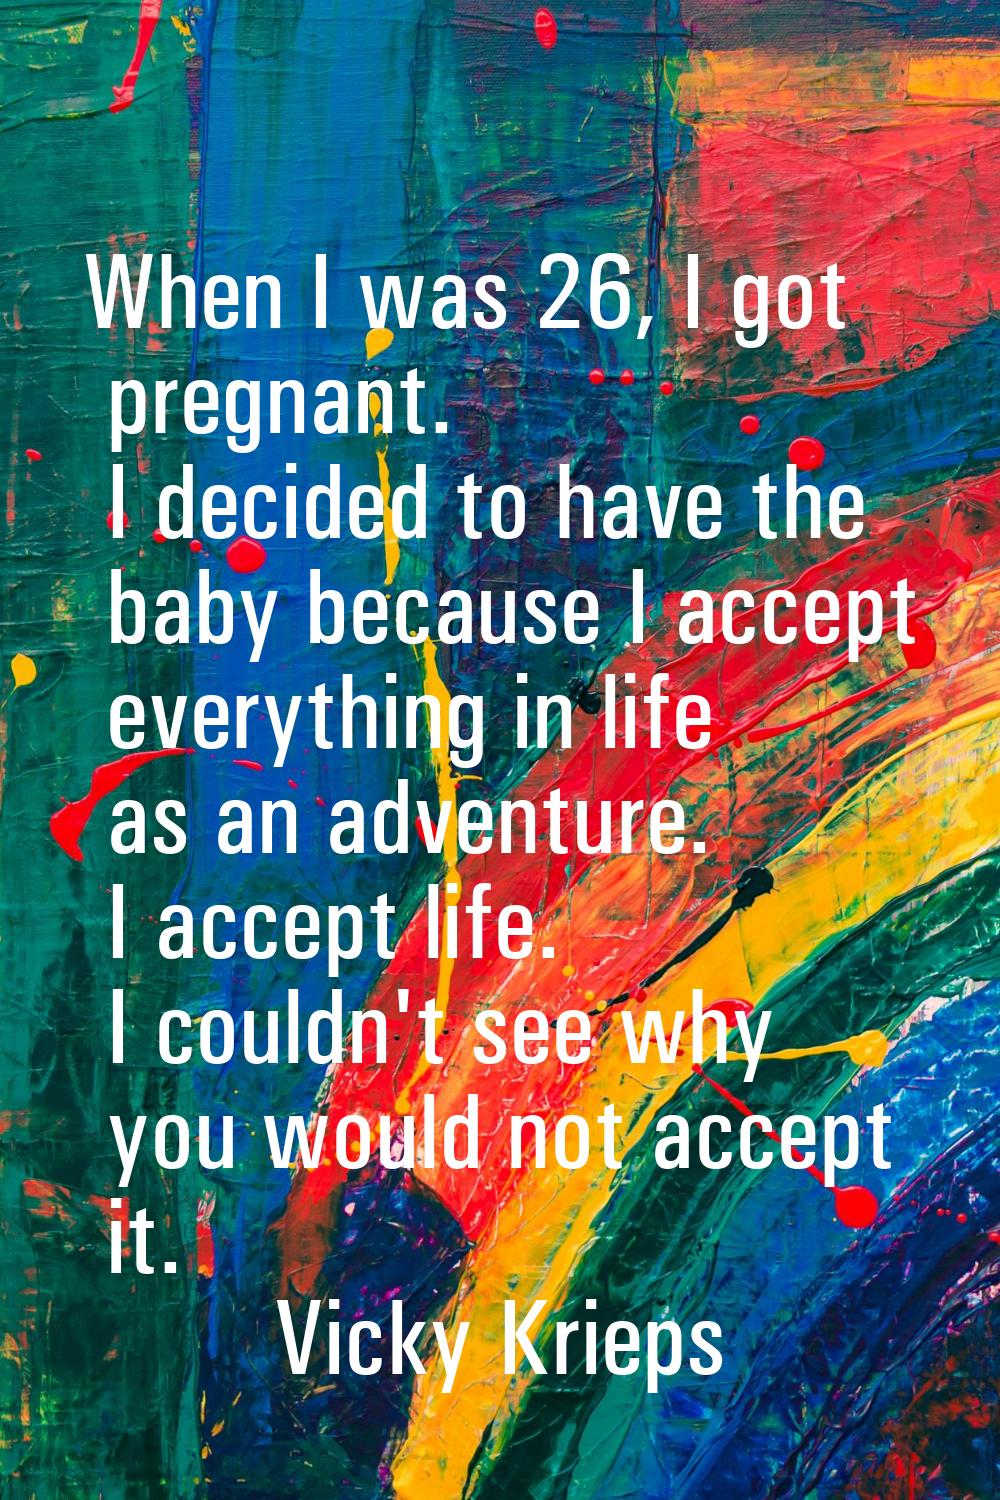 When I was 26, I got pregnant. I decided to have the baby because I accept everything in life as an